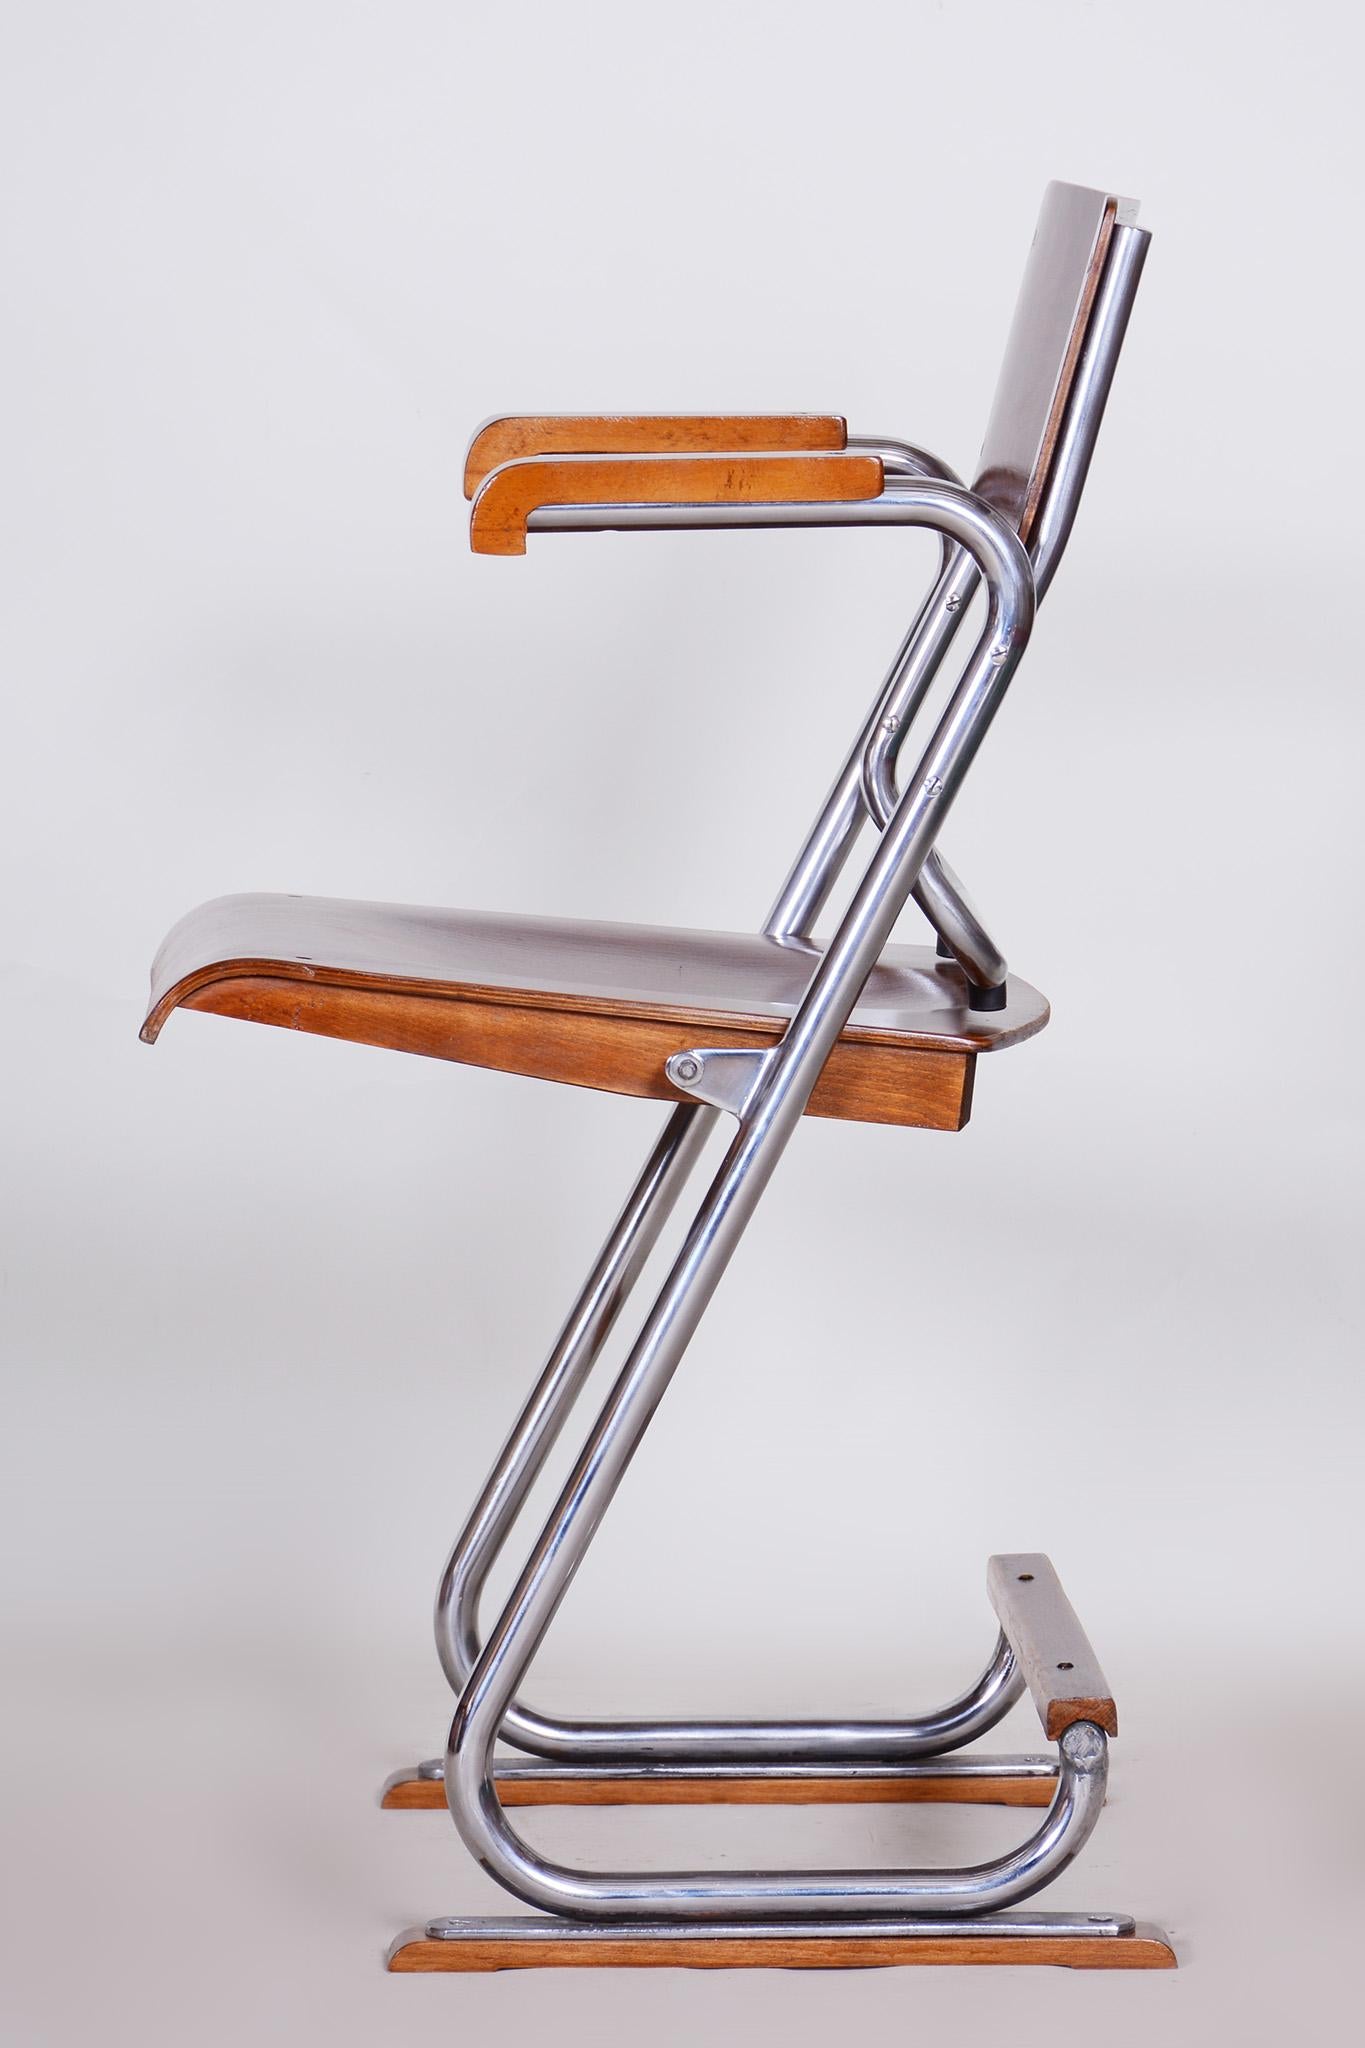 Restored Bauhaus Folding Chair, Beech Plywood, Revived Polish, Czechia, 1930s For Sale 1